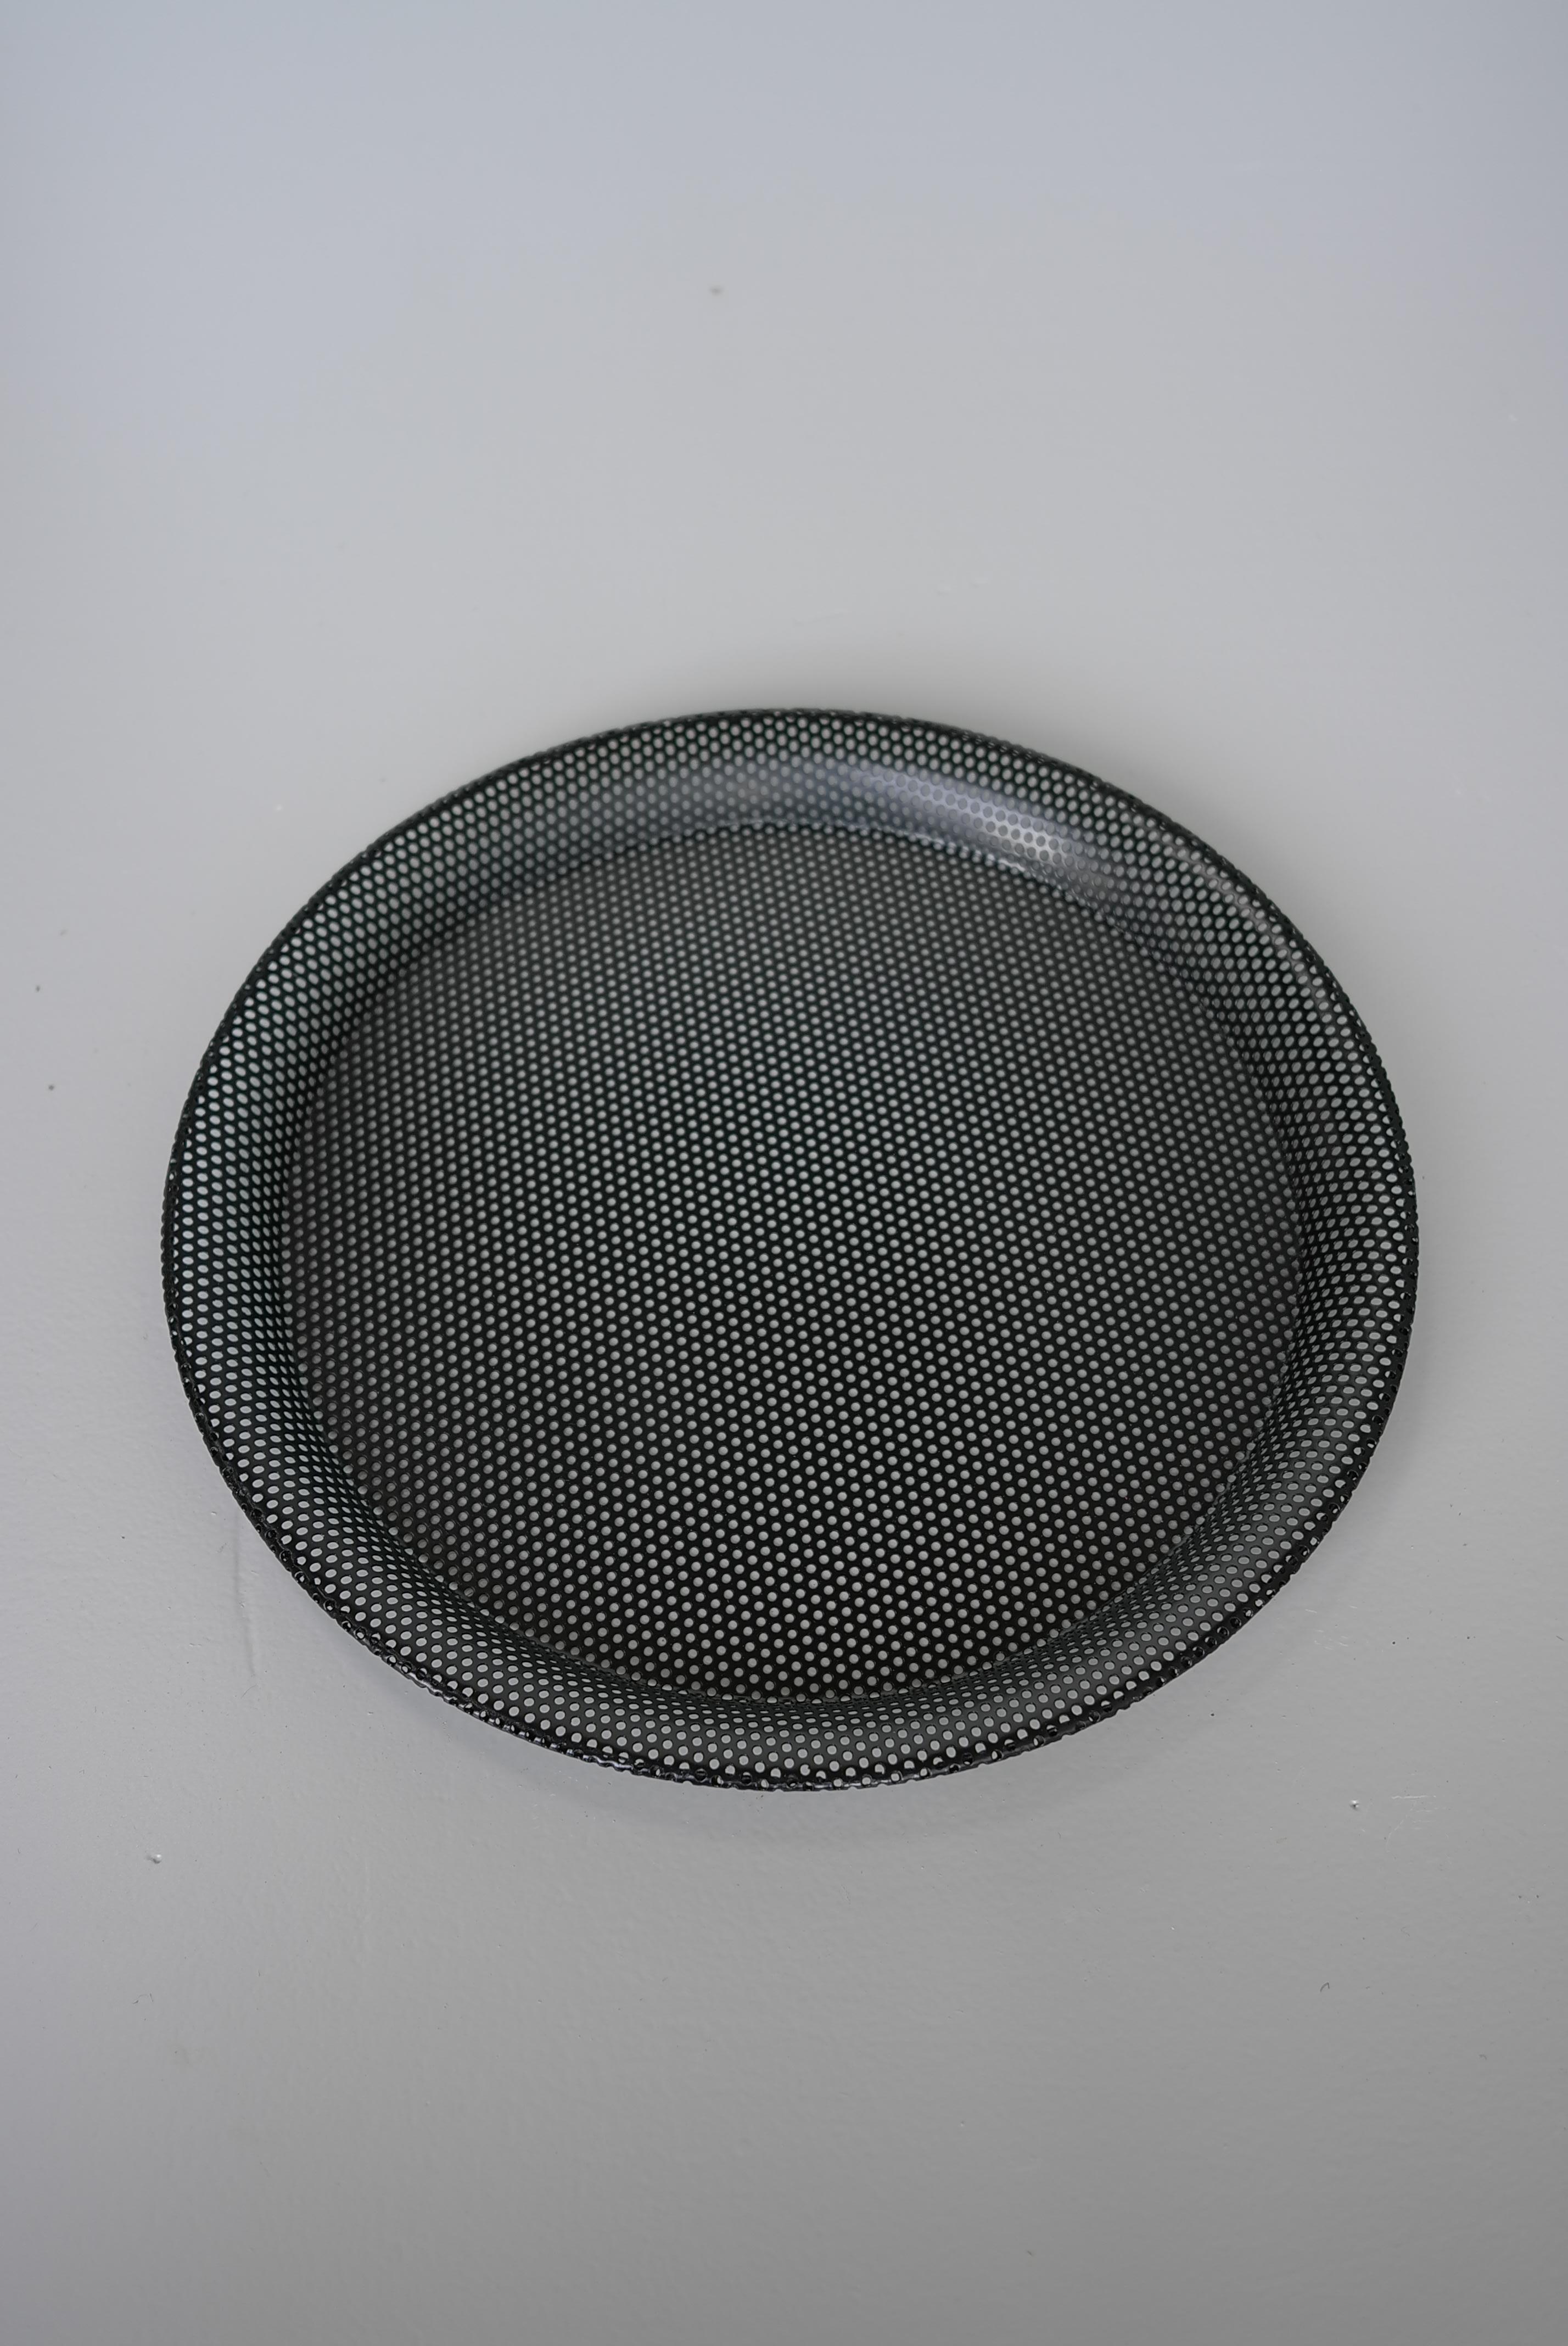 Black metal Tray designed by Mathieu Matégot. Manufactured by Ateliers Matégot, France, circa 1950. Lacquered perforated metal 